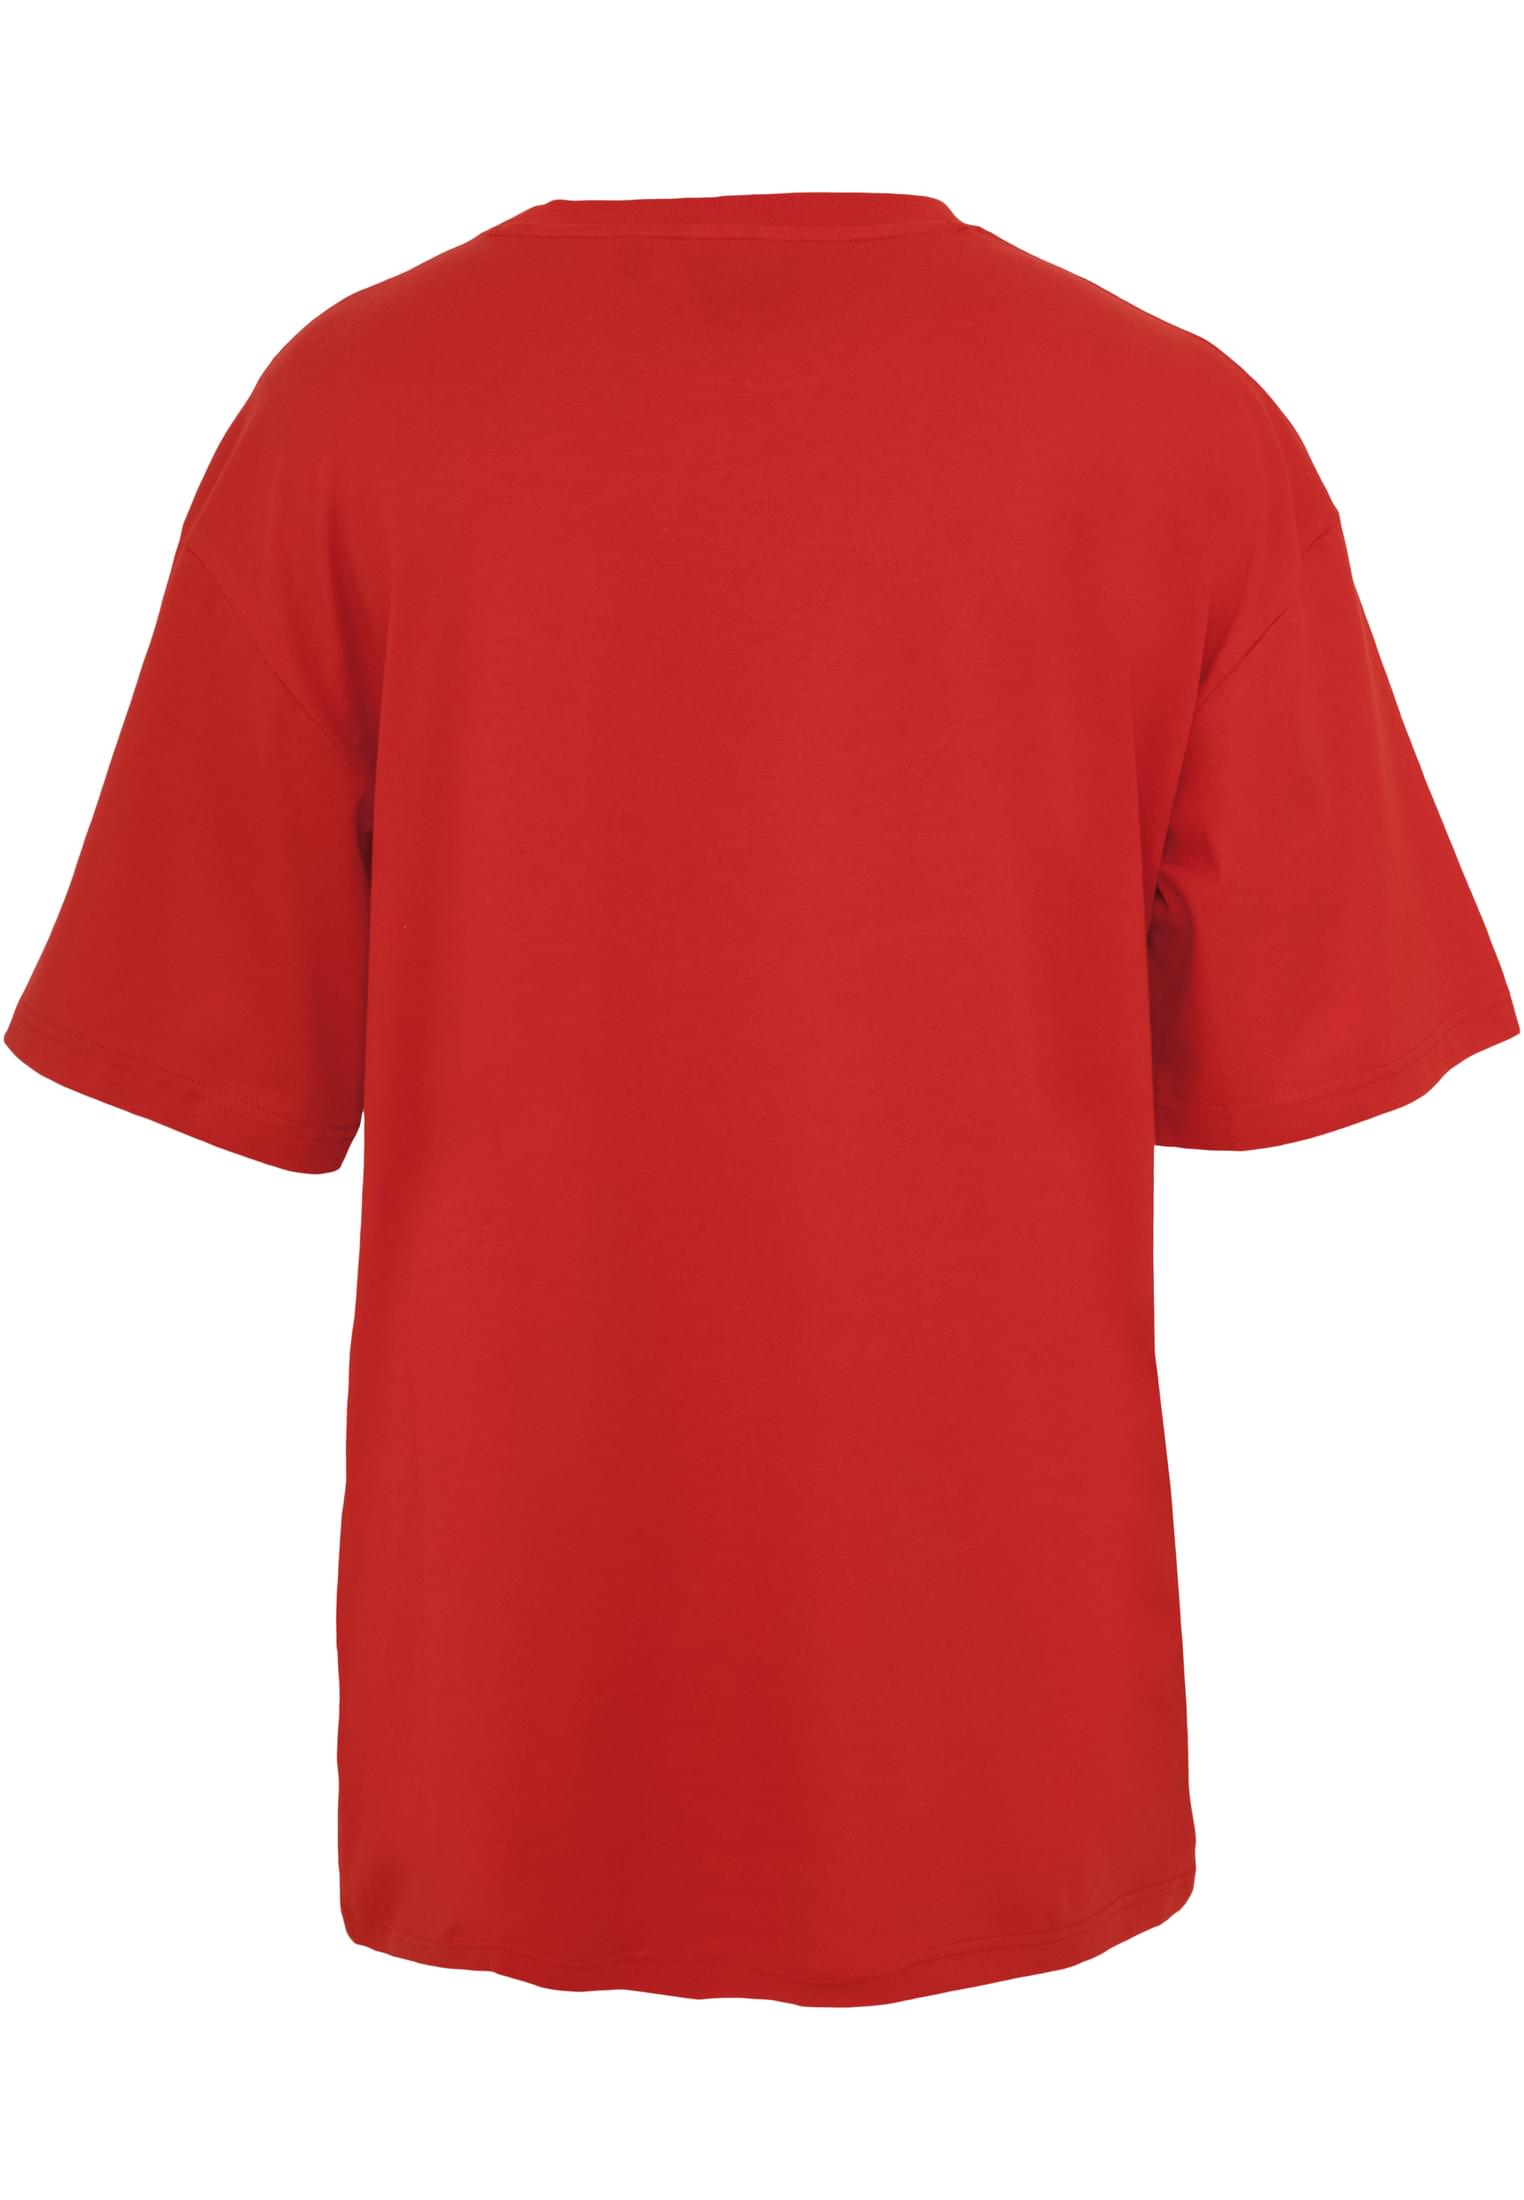 Plus Size Tall Tee in Farbe red